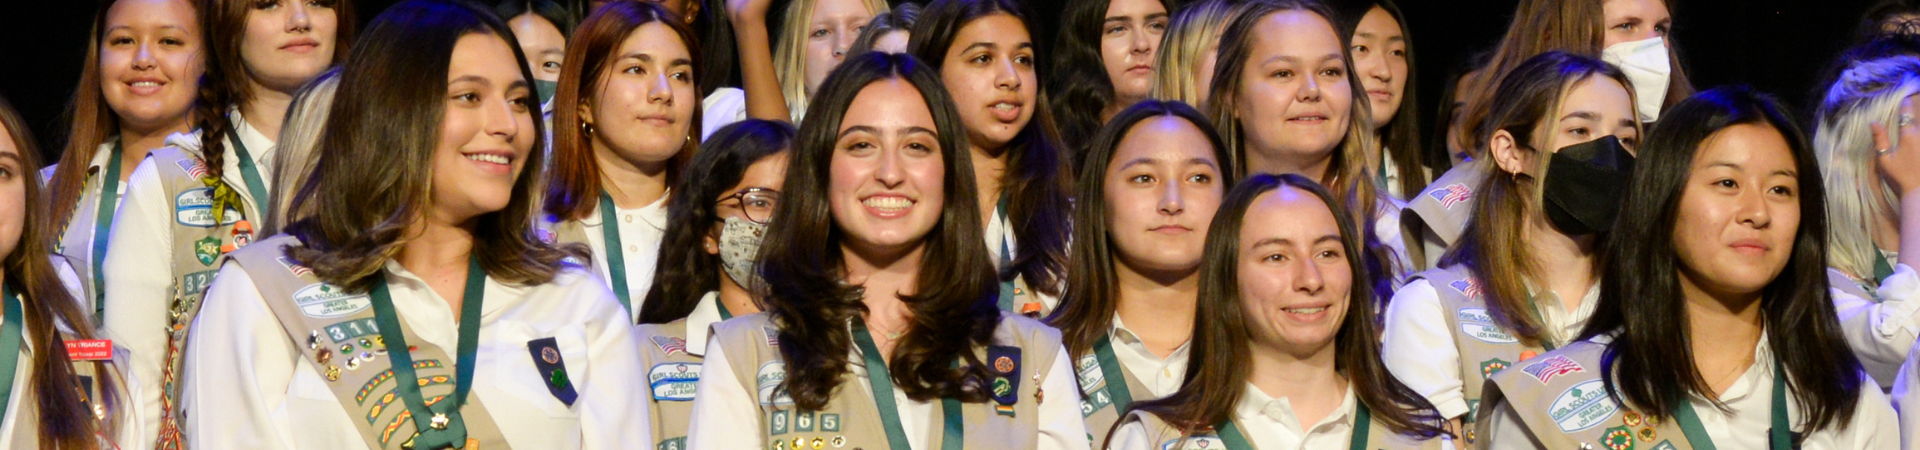  girl scout ambassador high school girl in school wearing sash with highest awards pins 